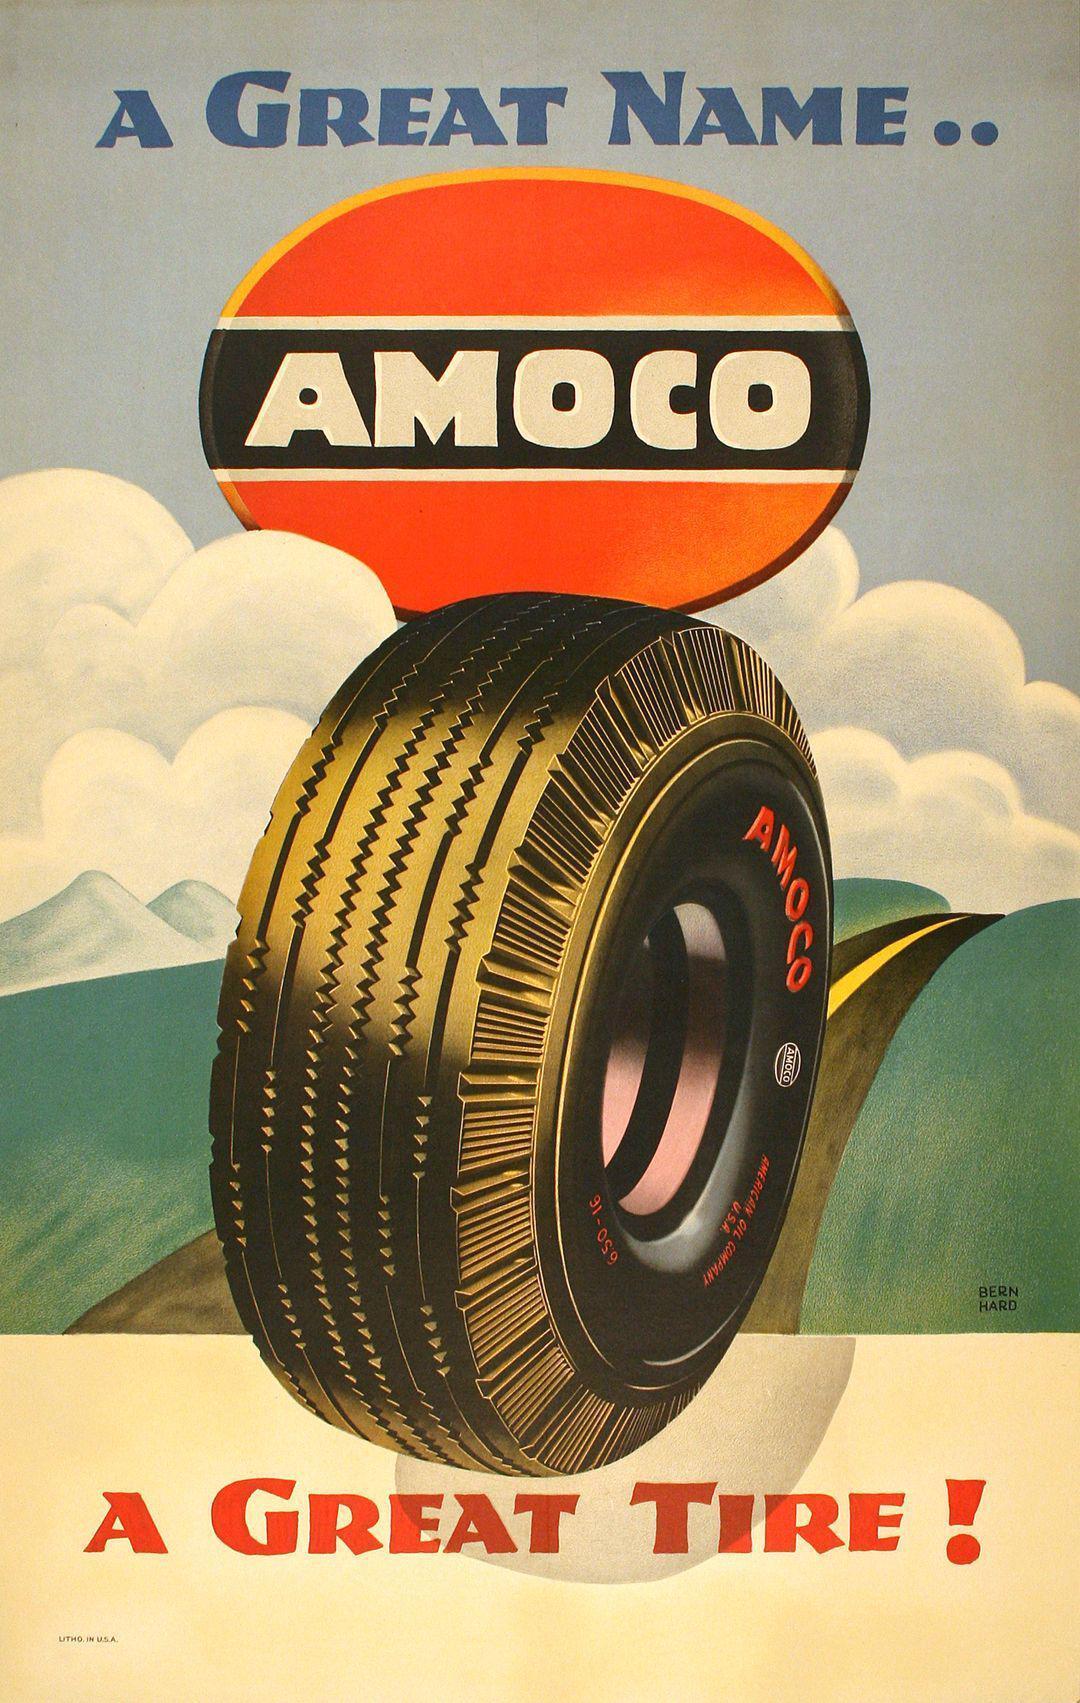 Original 1950's Lucian Bernhard Vintage Poster for Amoco - A Great Name A Great Tire